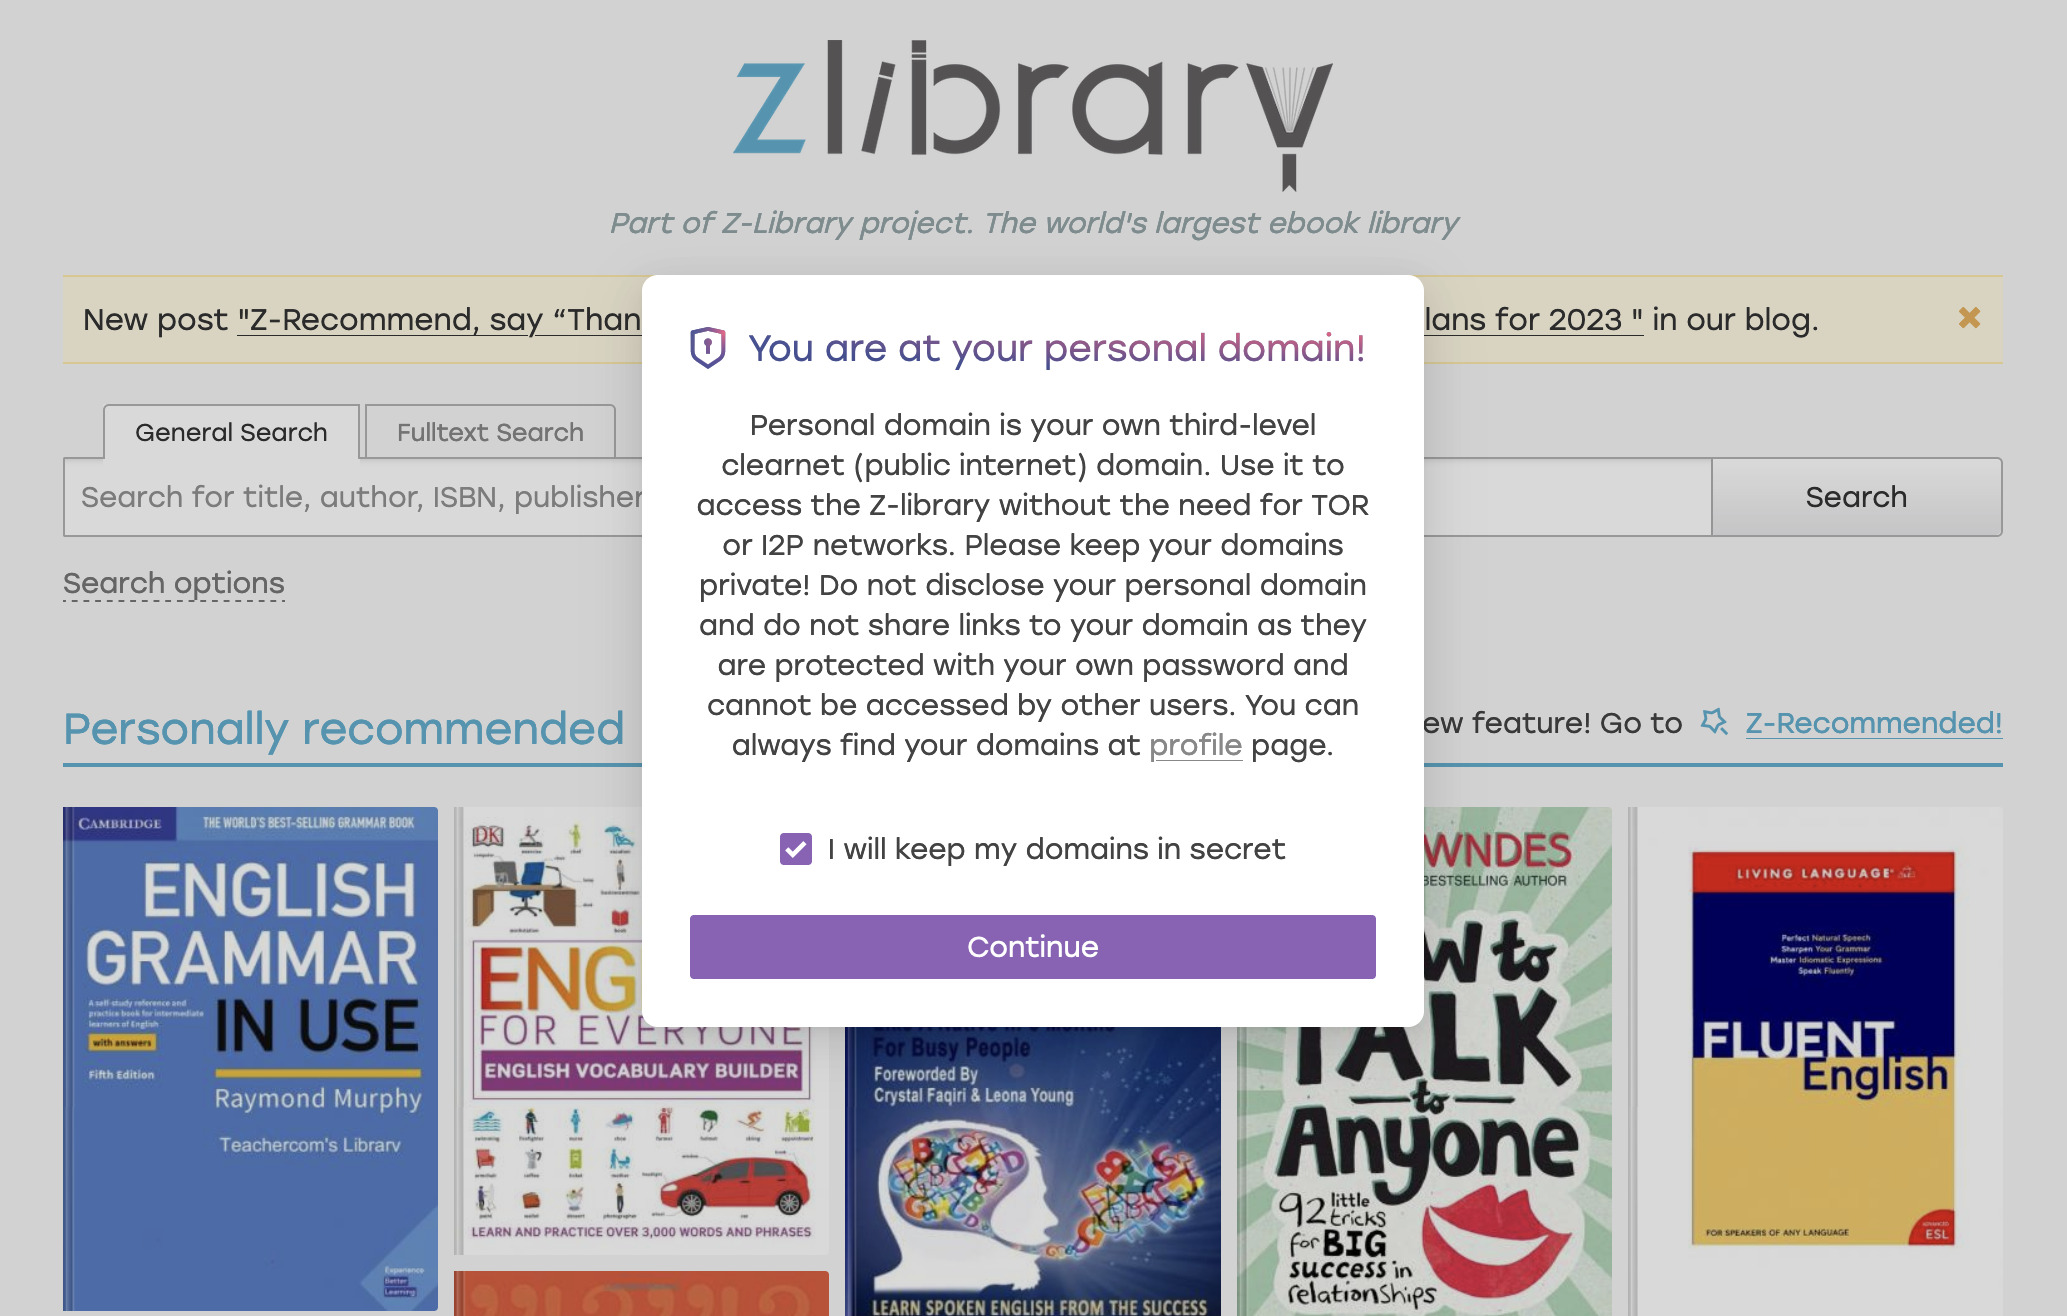 Does Z-Library have a new site?